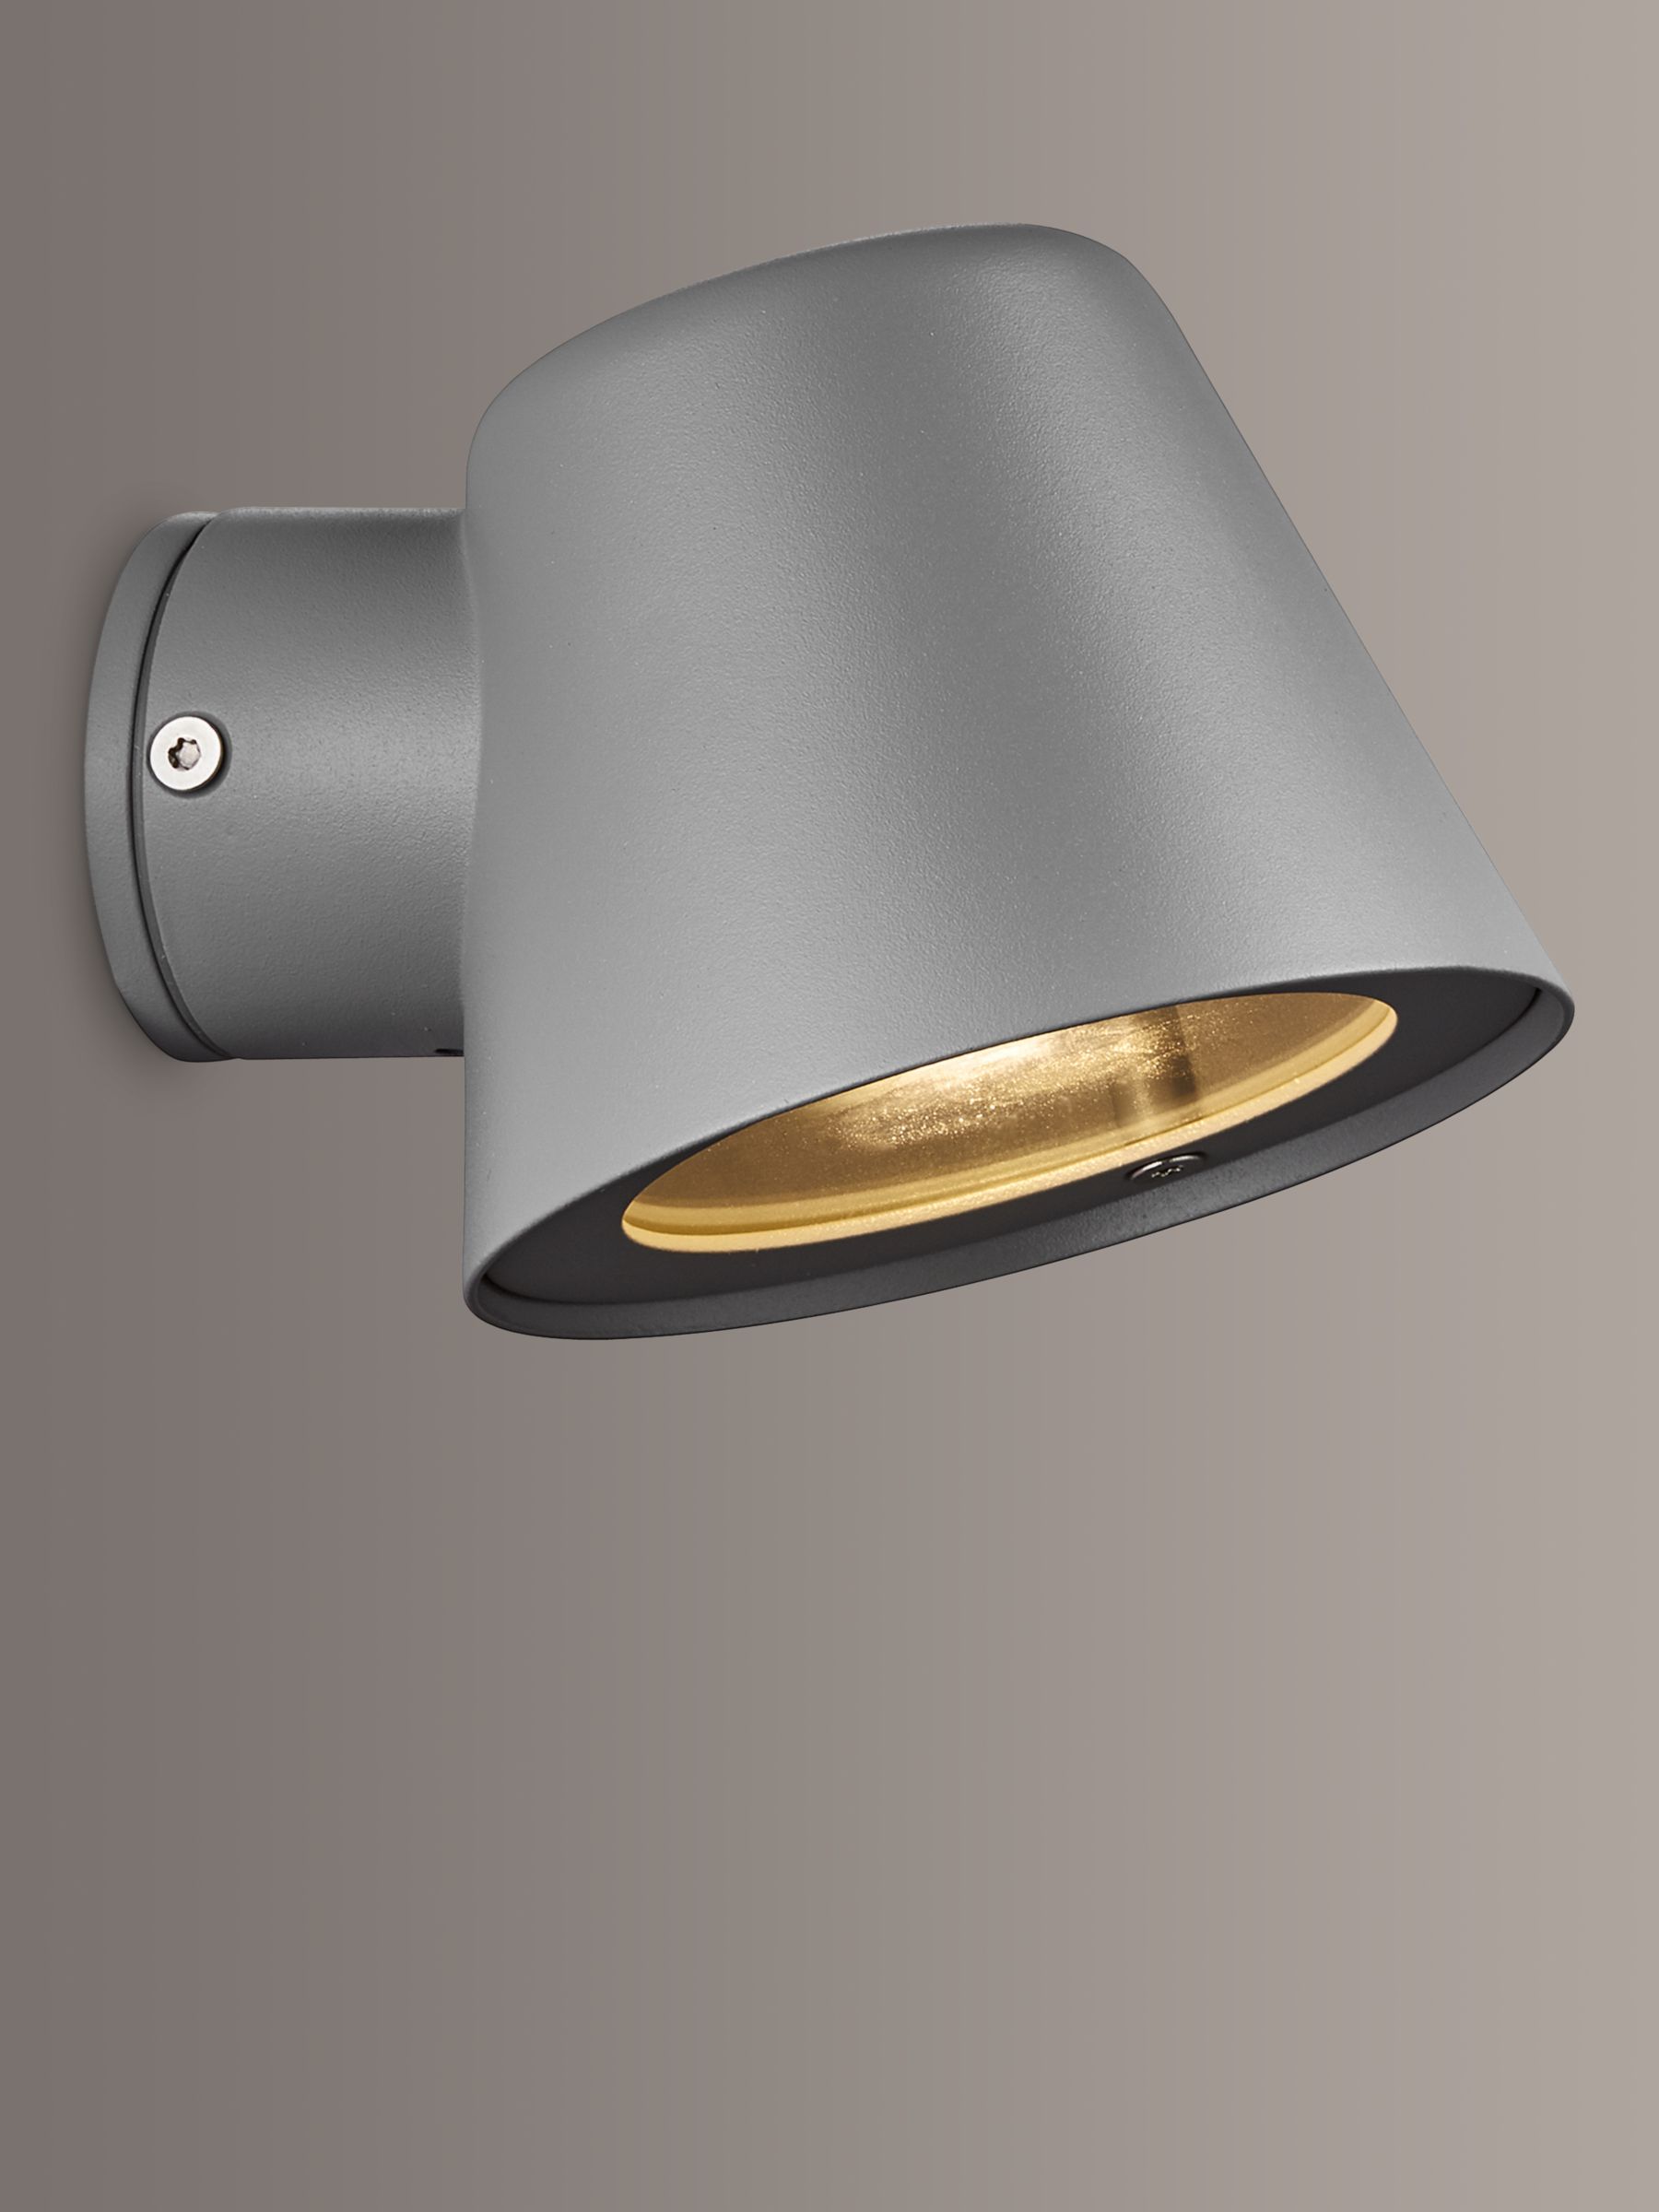 Photo of Nordlux aleria outdoor wall light